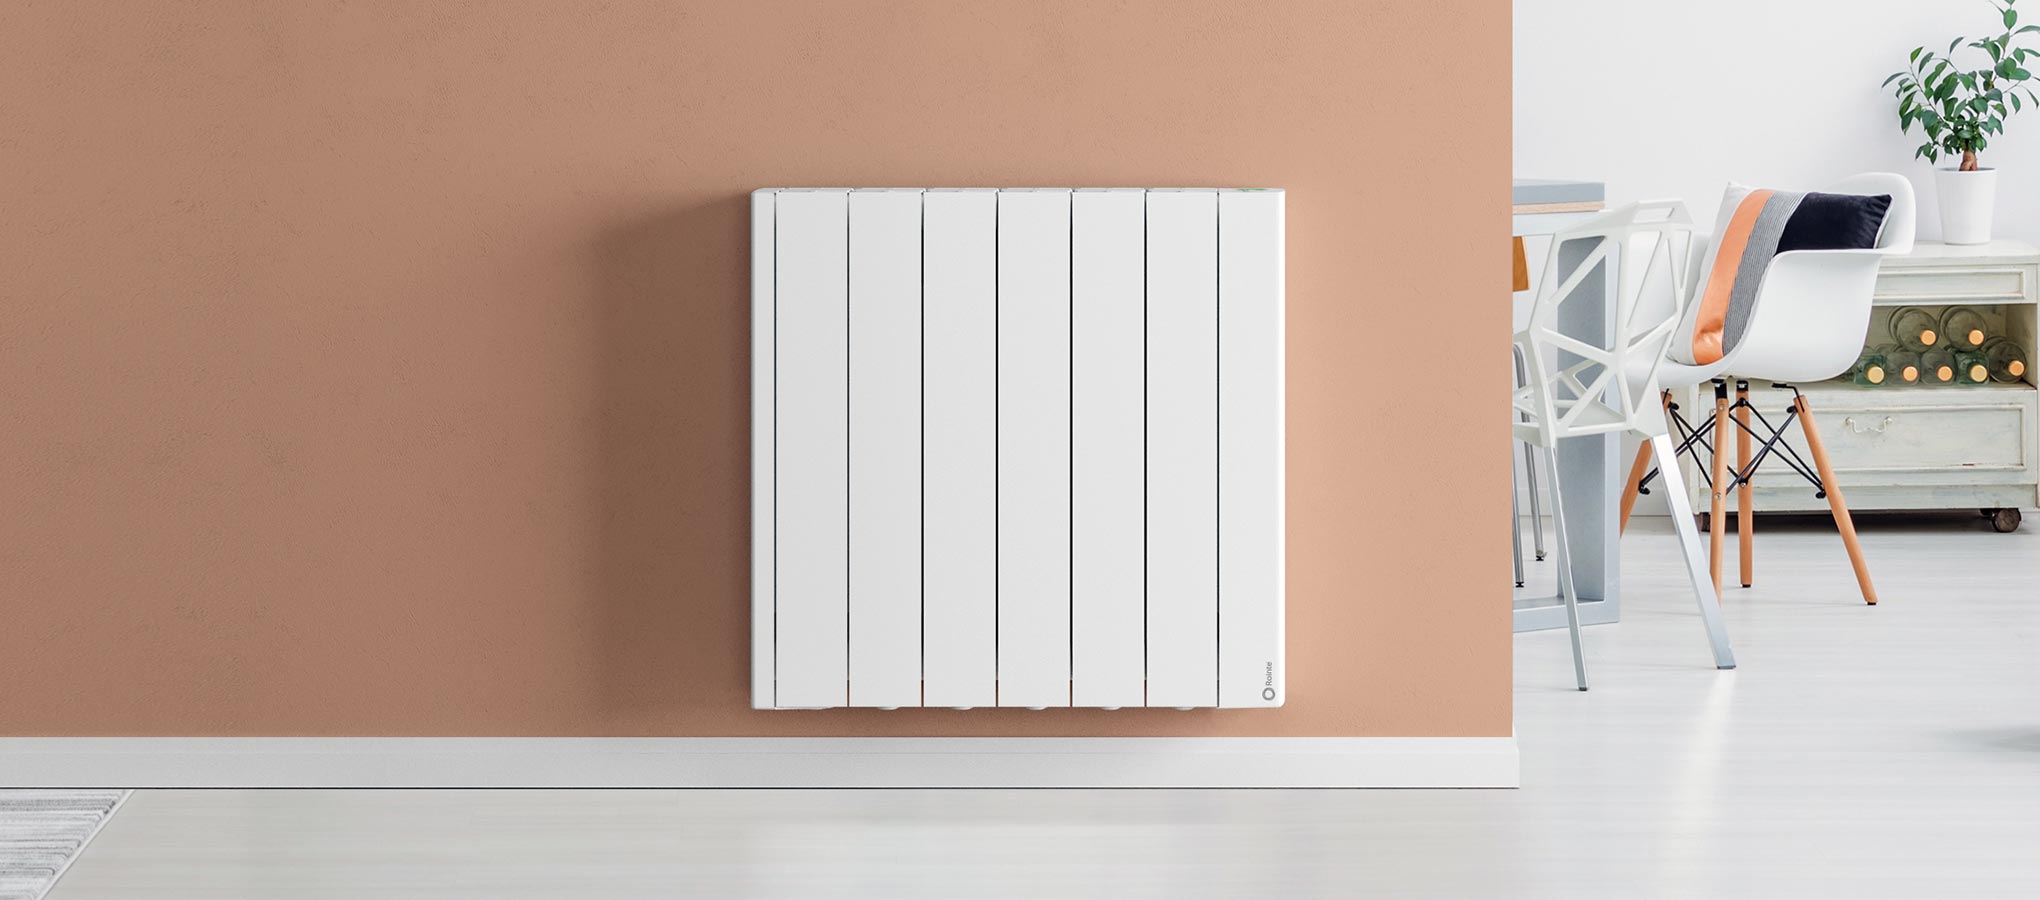 Rointe aluminium oil filled Belize basic wifi radiator in white wall mounted in living room